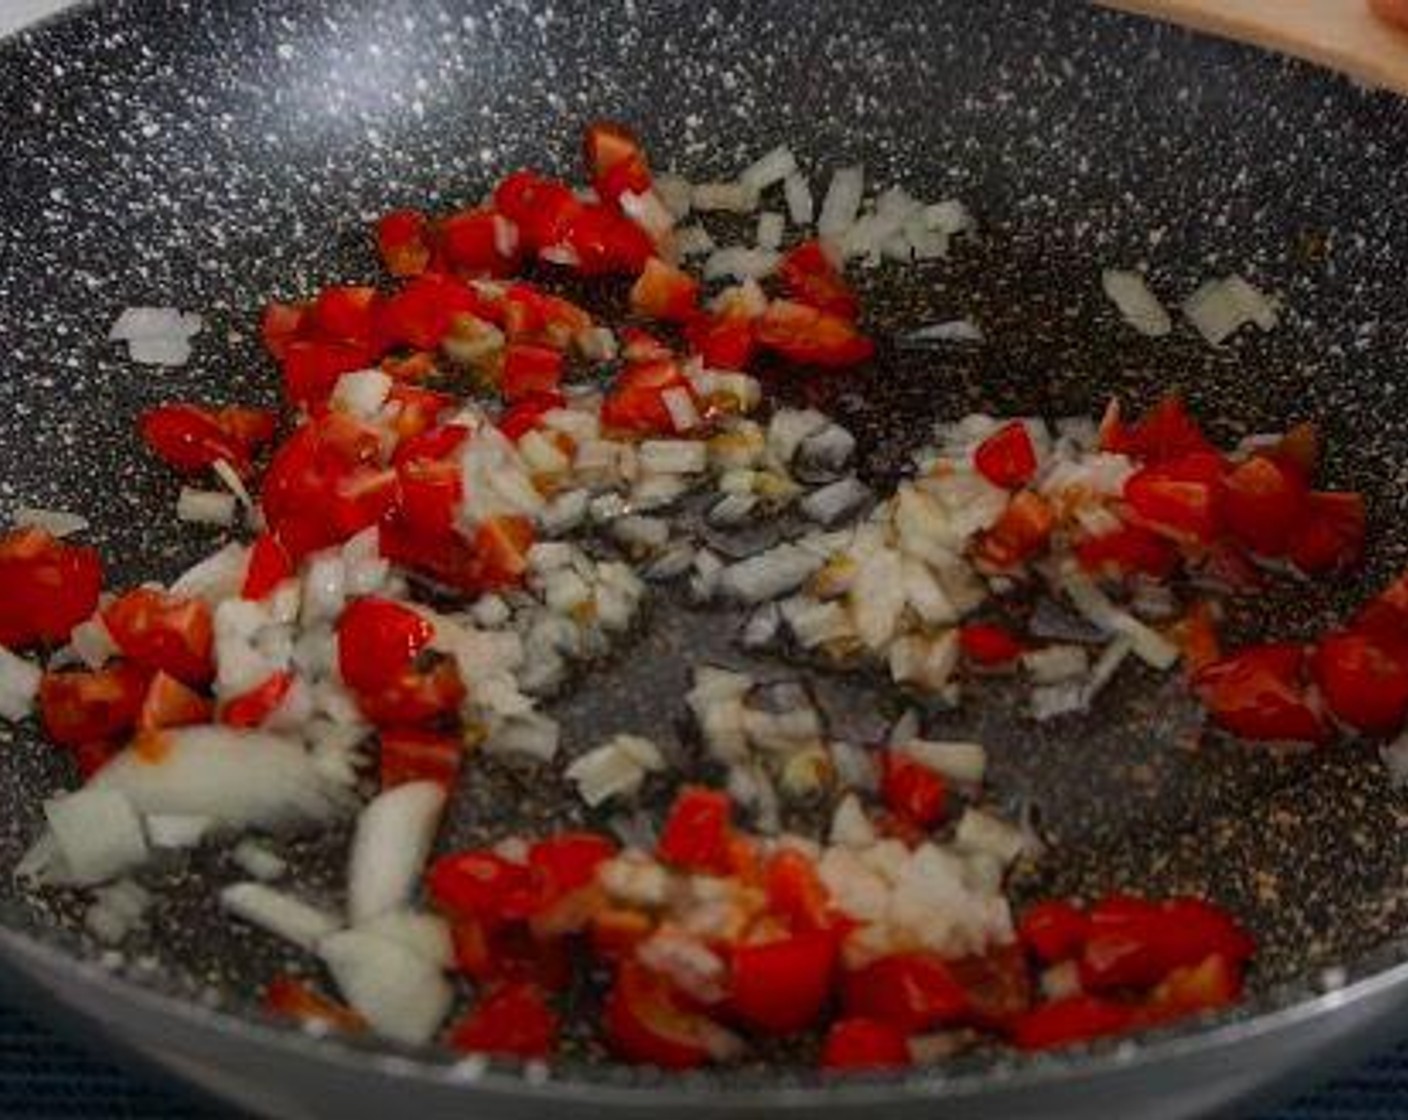 step 2 Then add the Onion (1/2 cup) and Plum Tomato (1/2 cup) and leave to cook for 5 minutes until the veggies are soft.